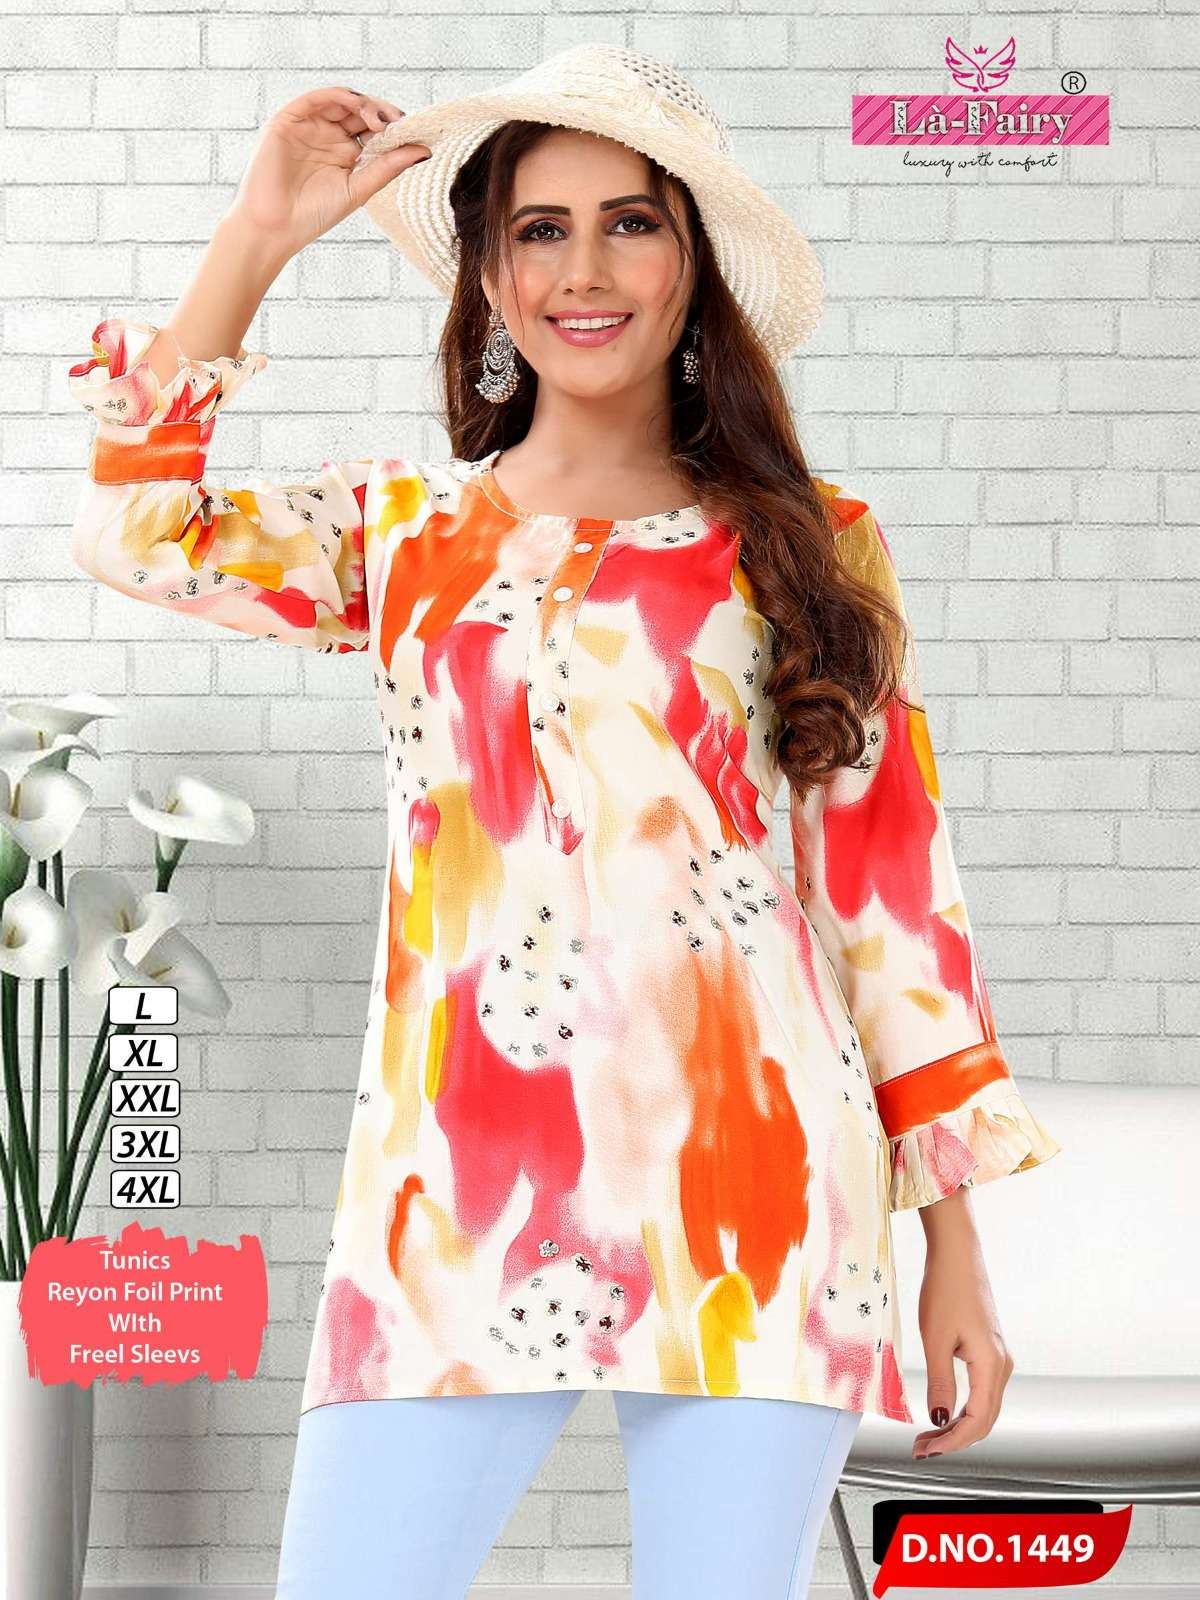 la fairy 1448-1450 fancy rayon foil print readymade tunics tops with frill sleeves combo set